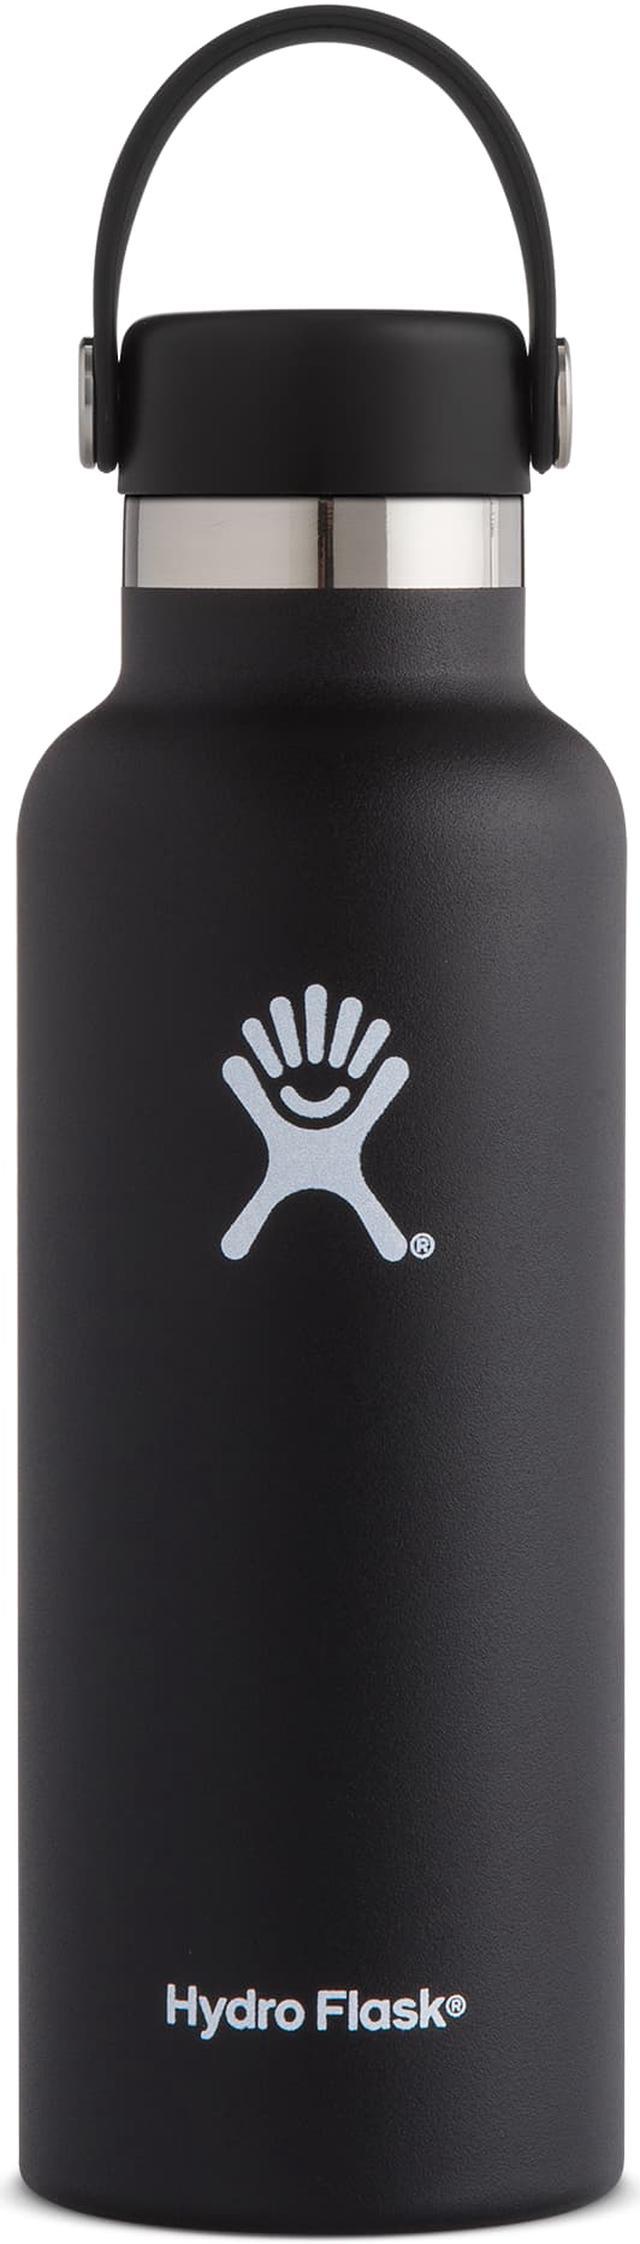  18oz Water Bottle,Vacuum Insulated Stainless Steel